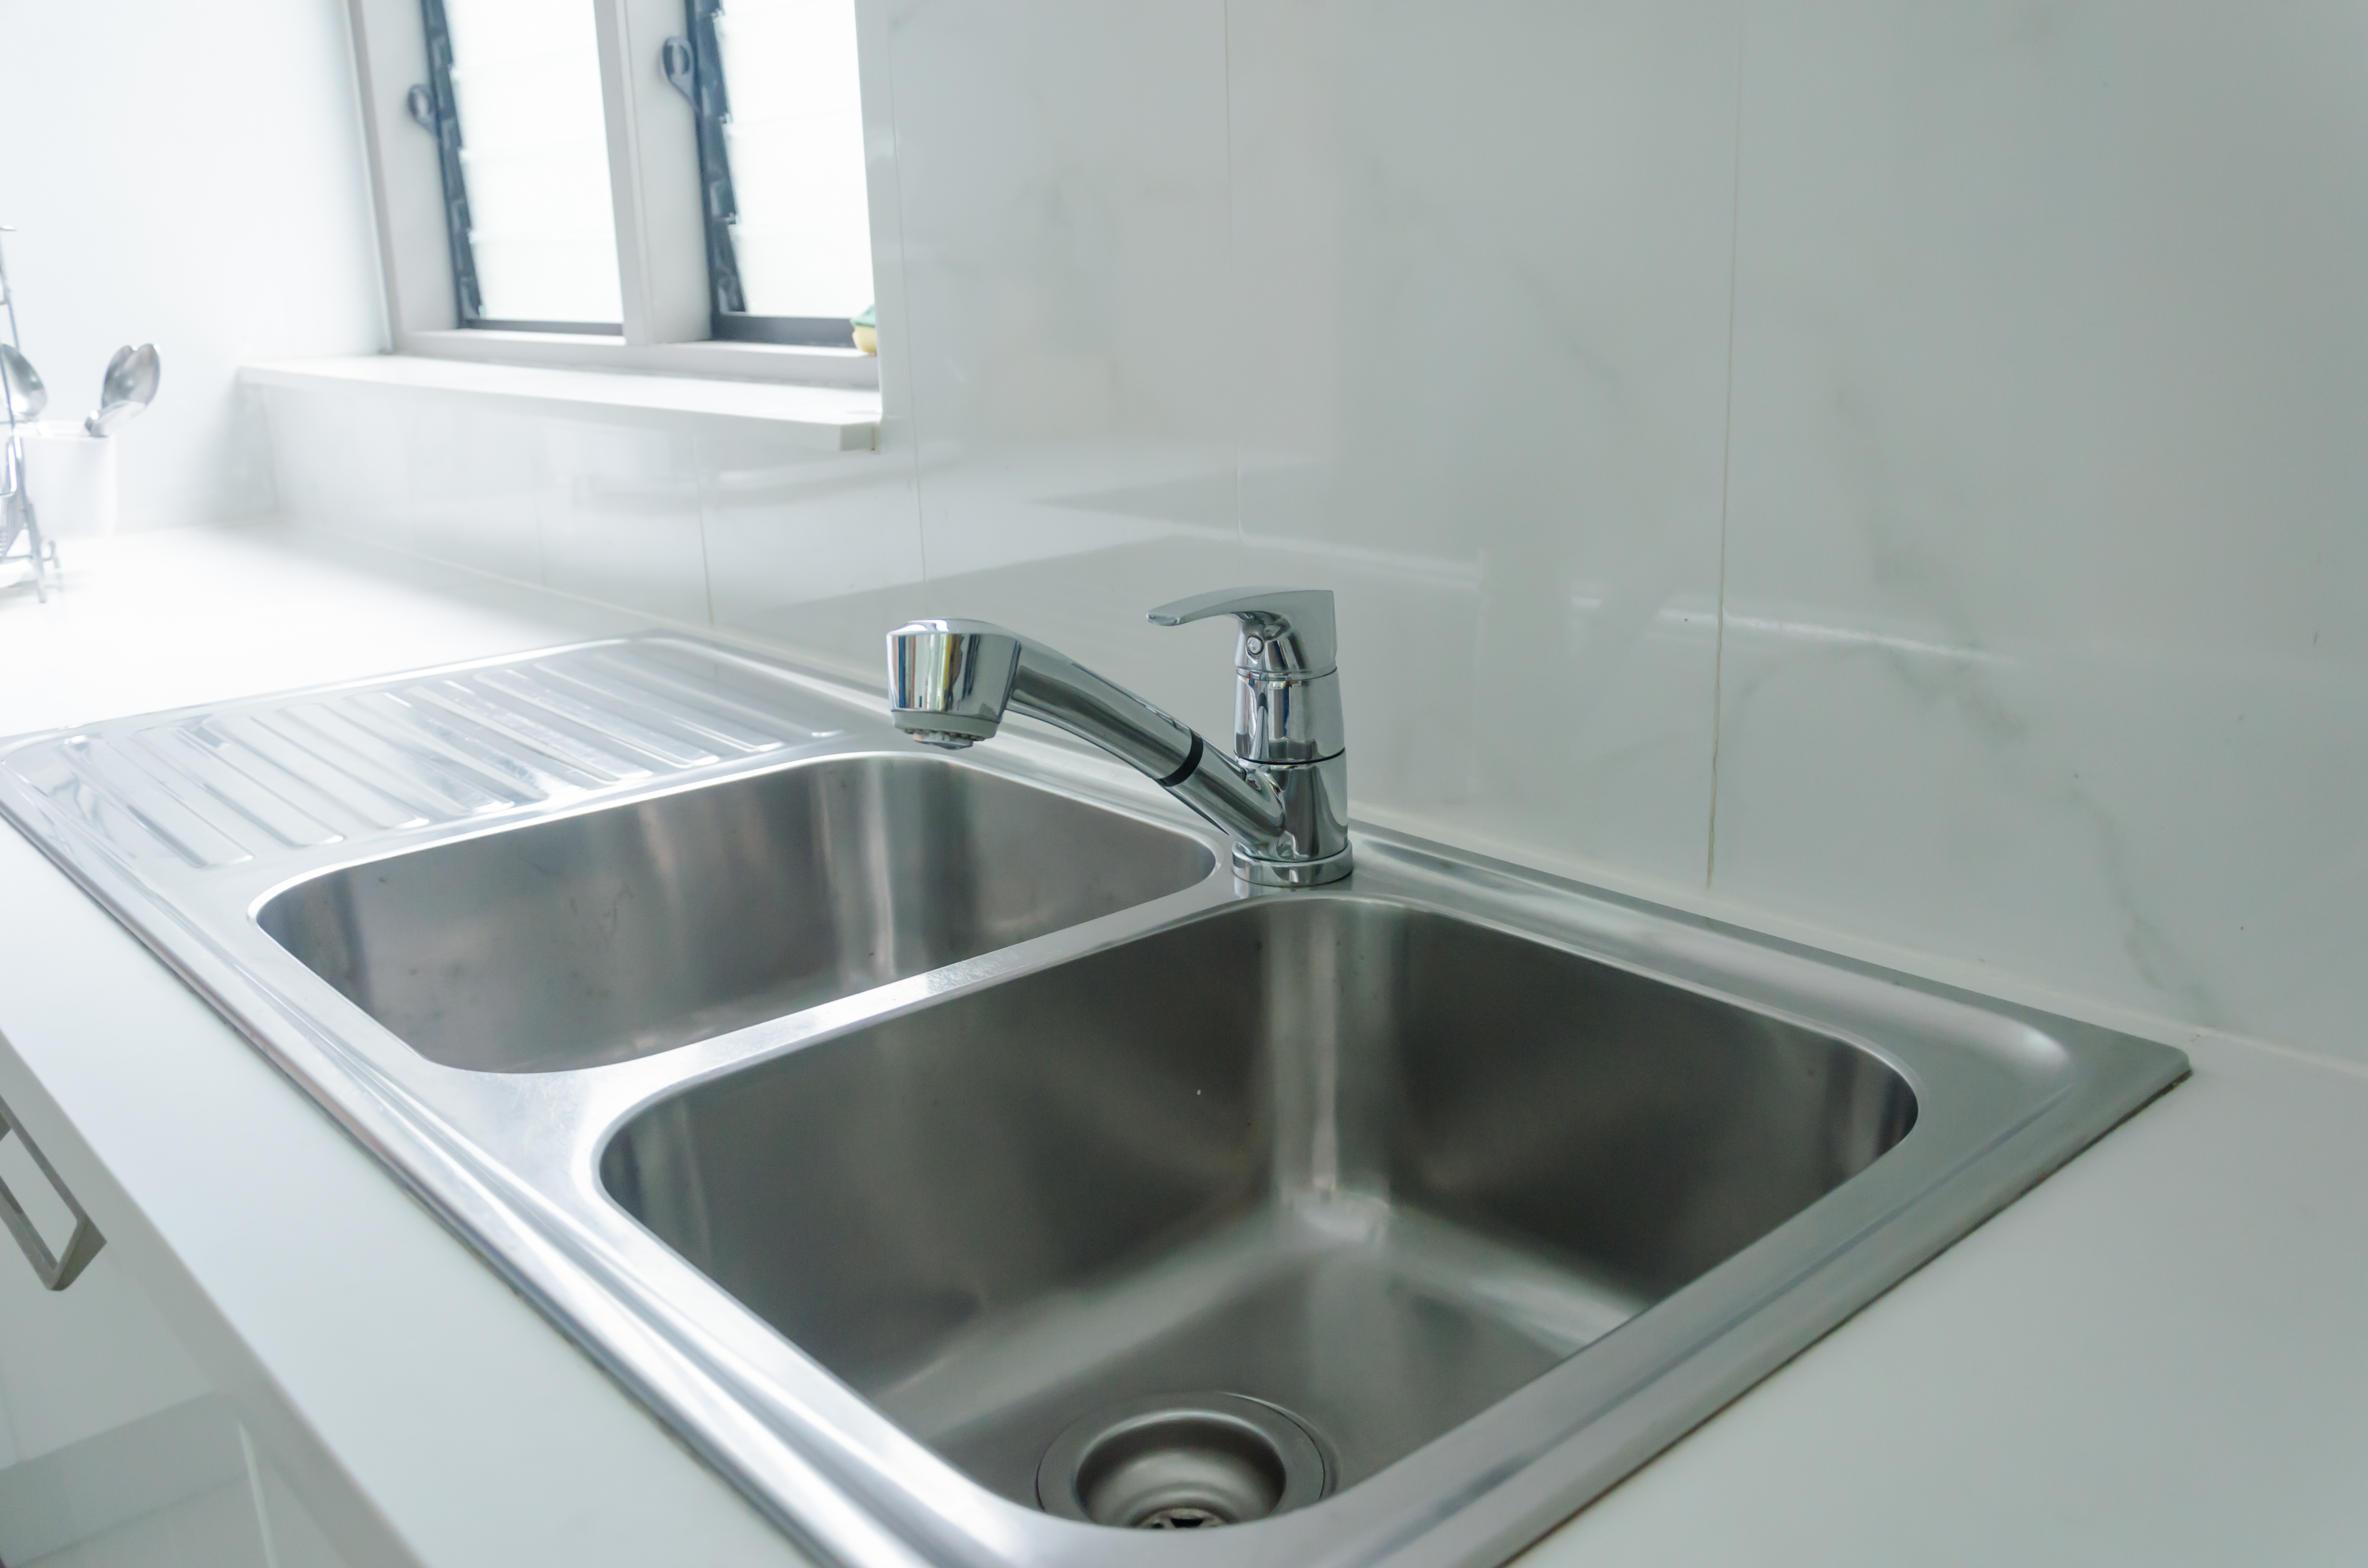 4 Tips to Fix a Slow Draining Sink